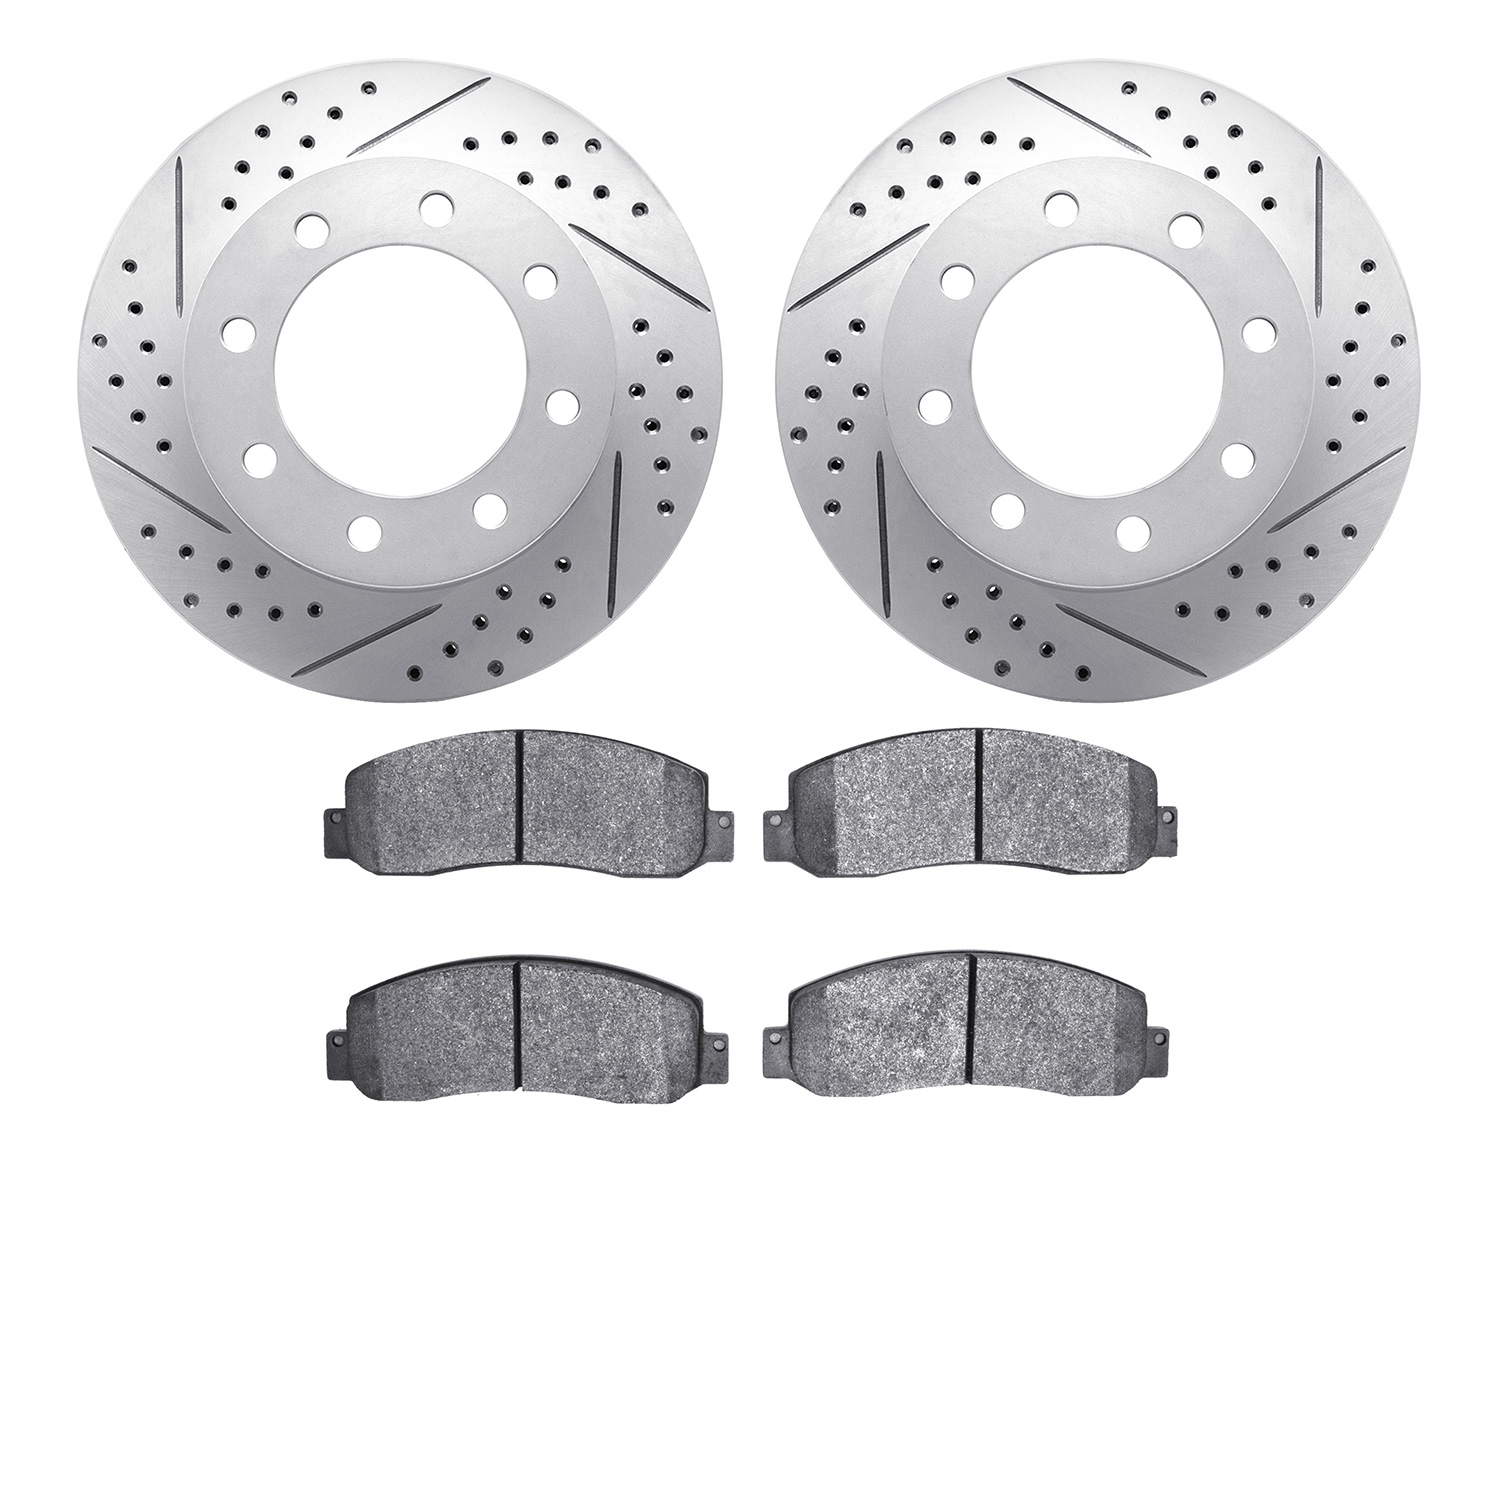 2502-54176 Geoperformance Drilled/Slotted Rotors w/5000 Advanced Brake Pads Kit, 2005-2011 Ford/Lincoln/Mercury/Mazda, Position: